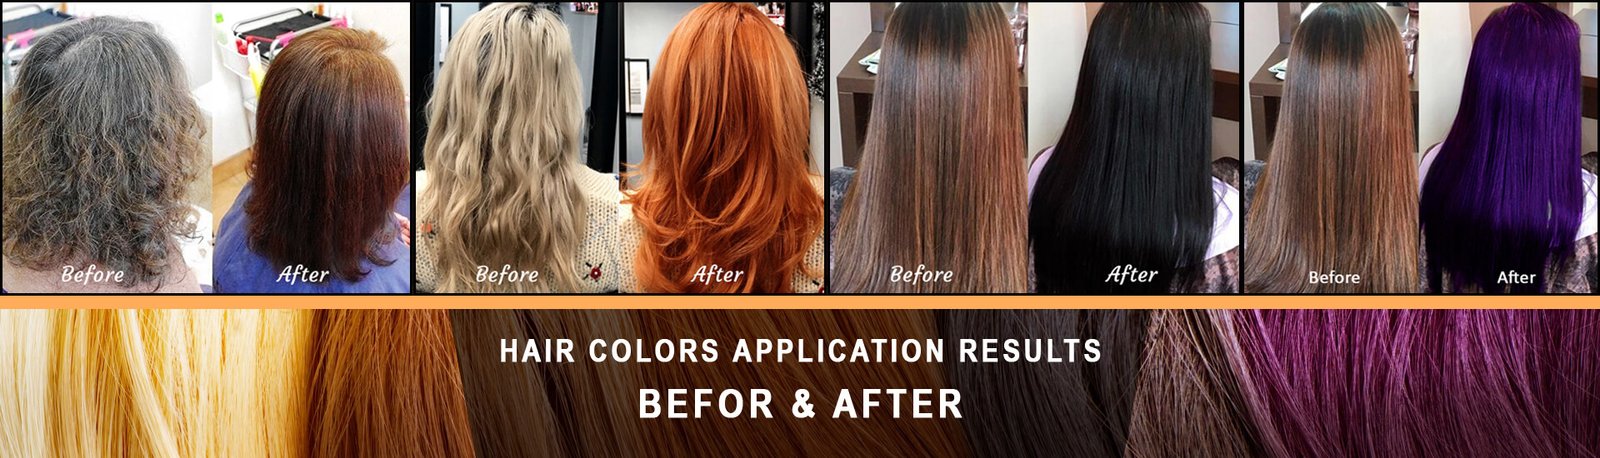 Before-and-After-Hair-Colors-Application-Result